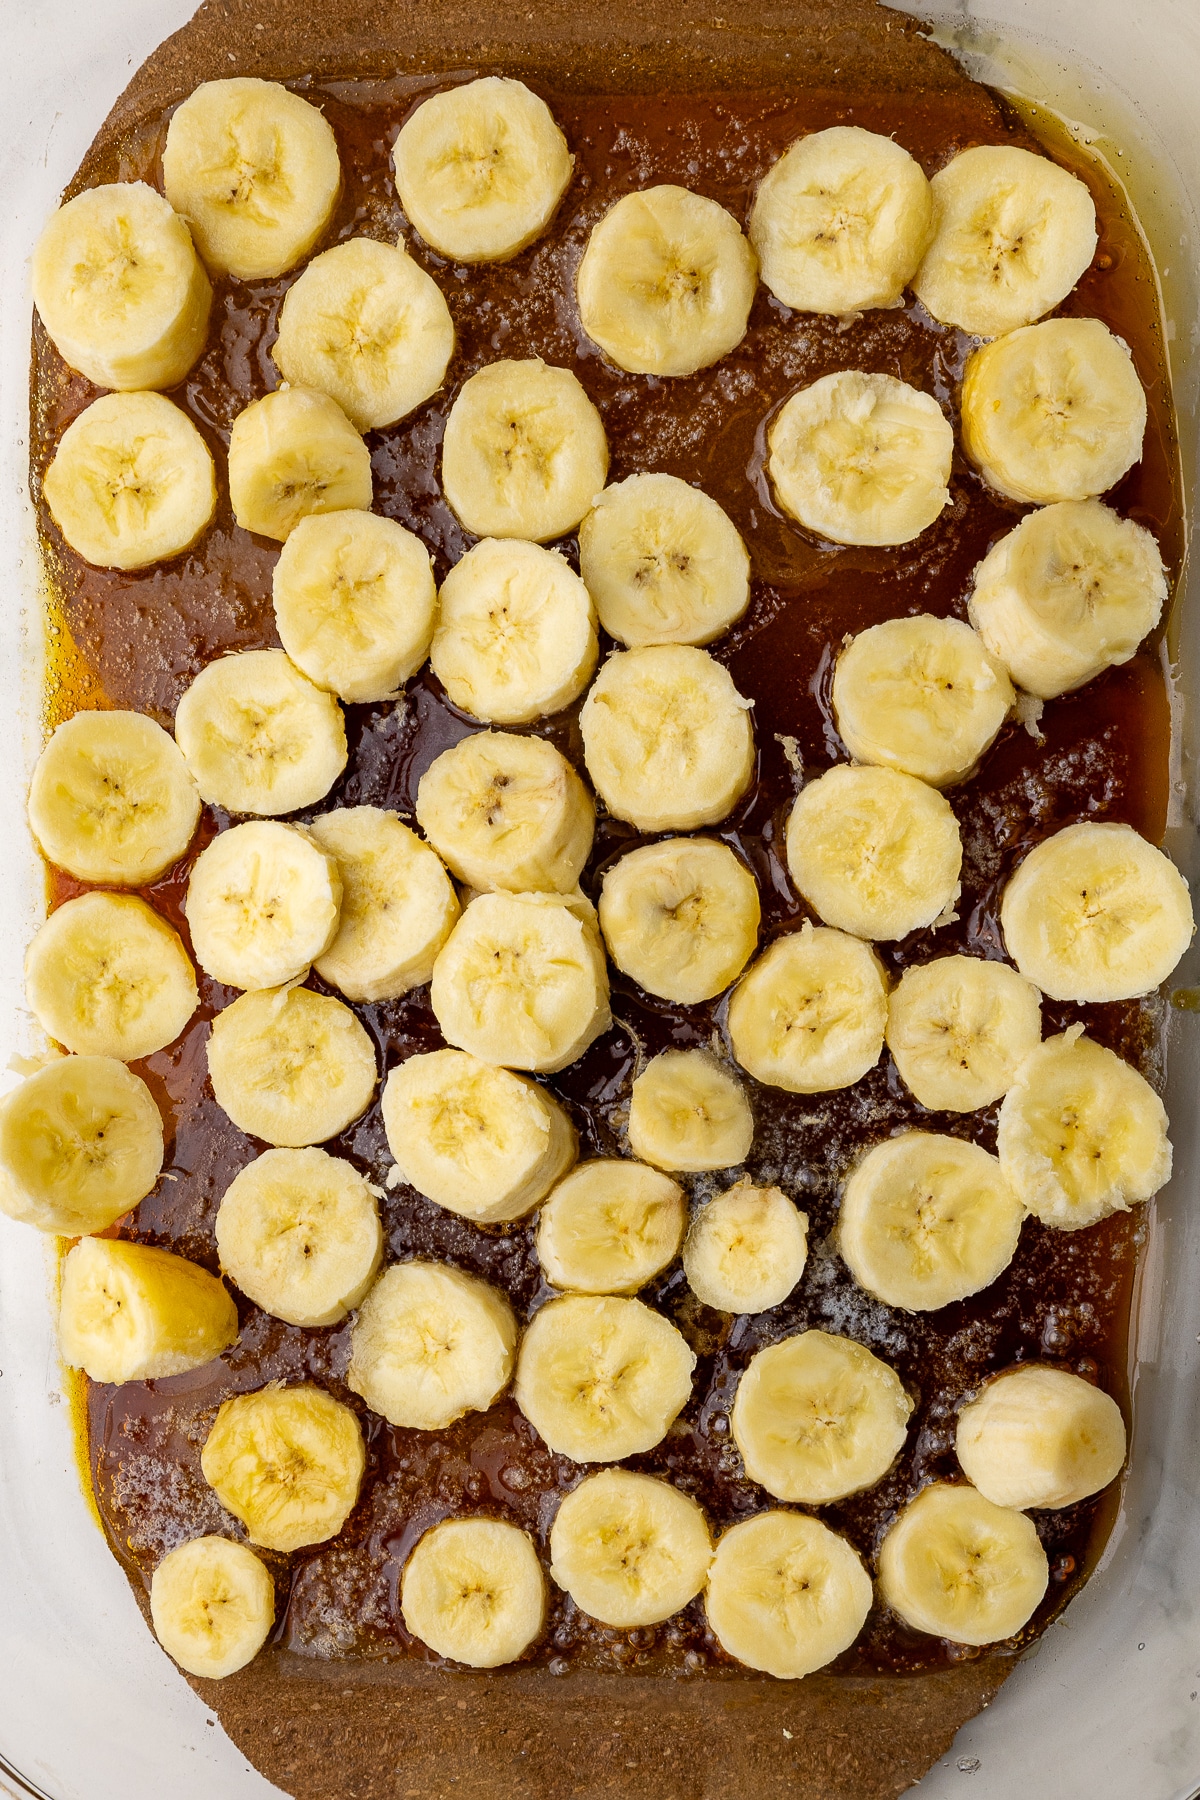 sliced bananas on caramelized sugar in the bottom of a 9x13 deep dish casserole